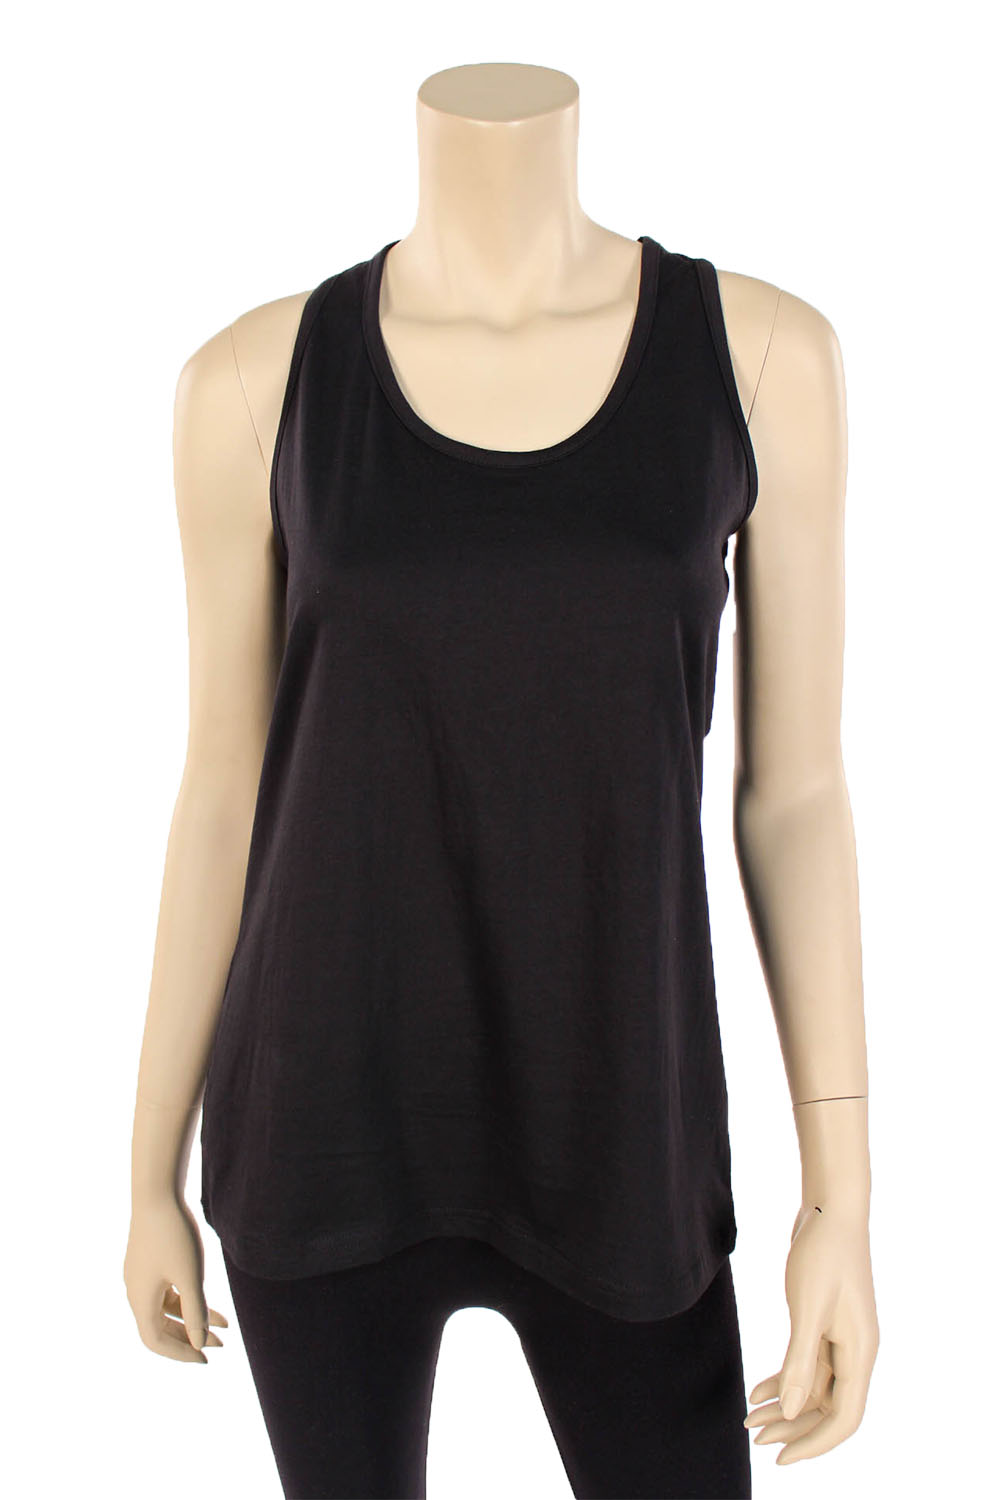 Womens Loose Fit Racerback Tank Top Relaxed Flowy Cotton Sleeveless ...